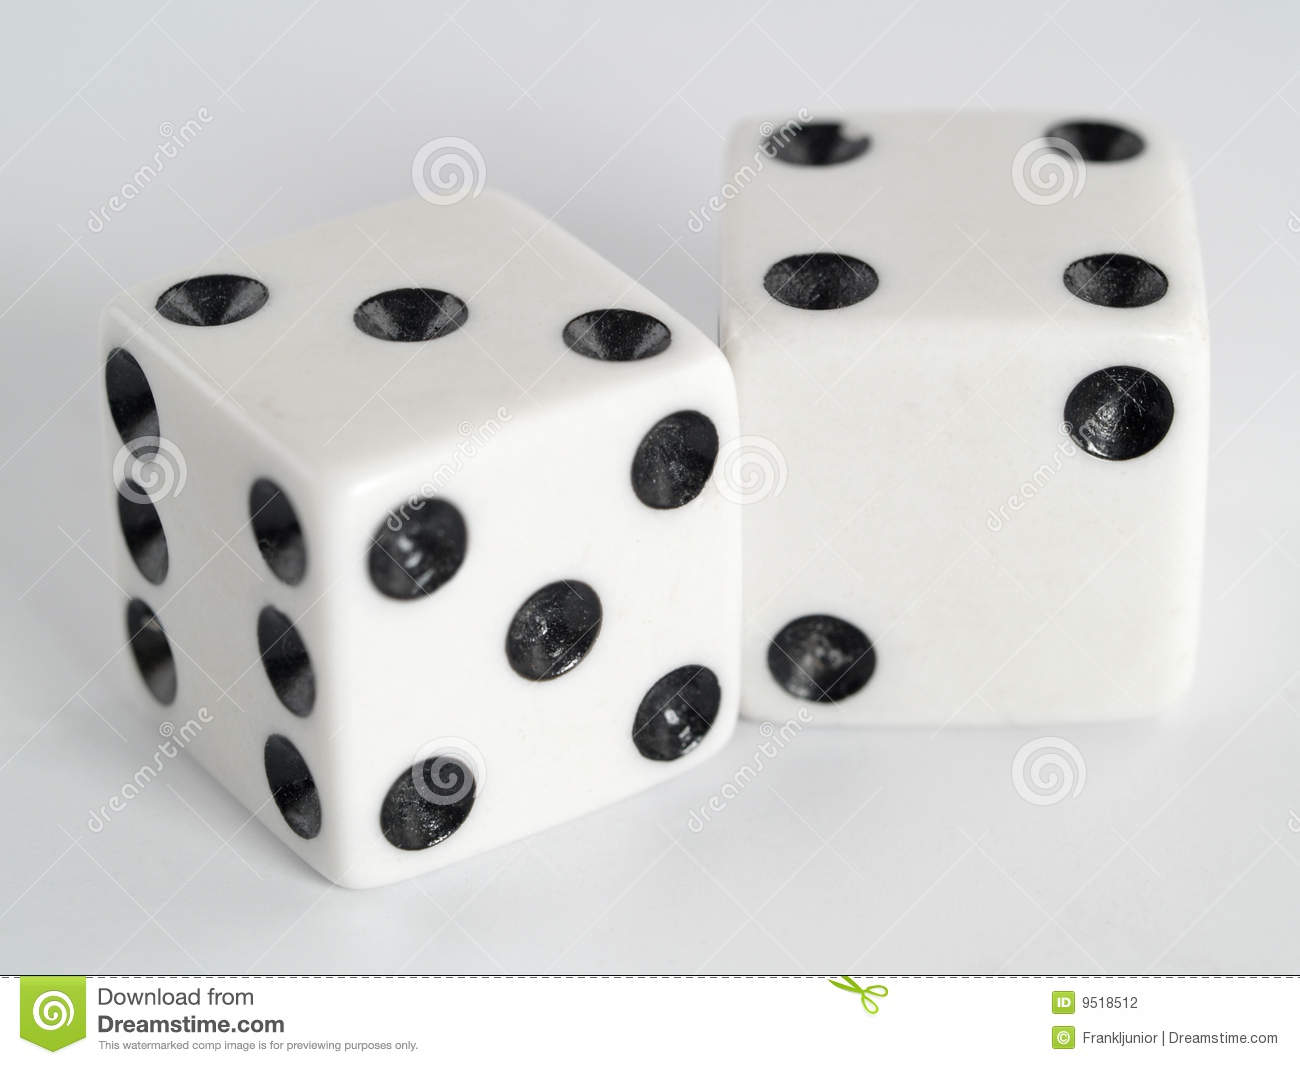 White Dice Black Dots Stock Photography   Image  9518512